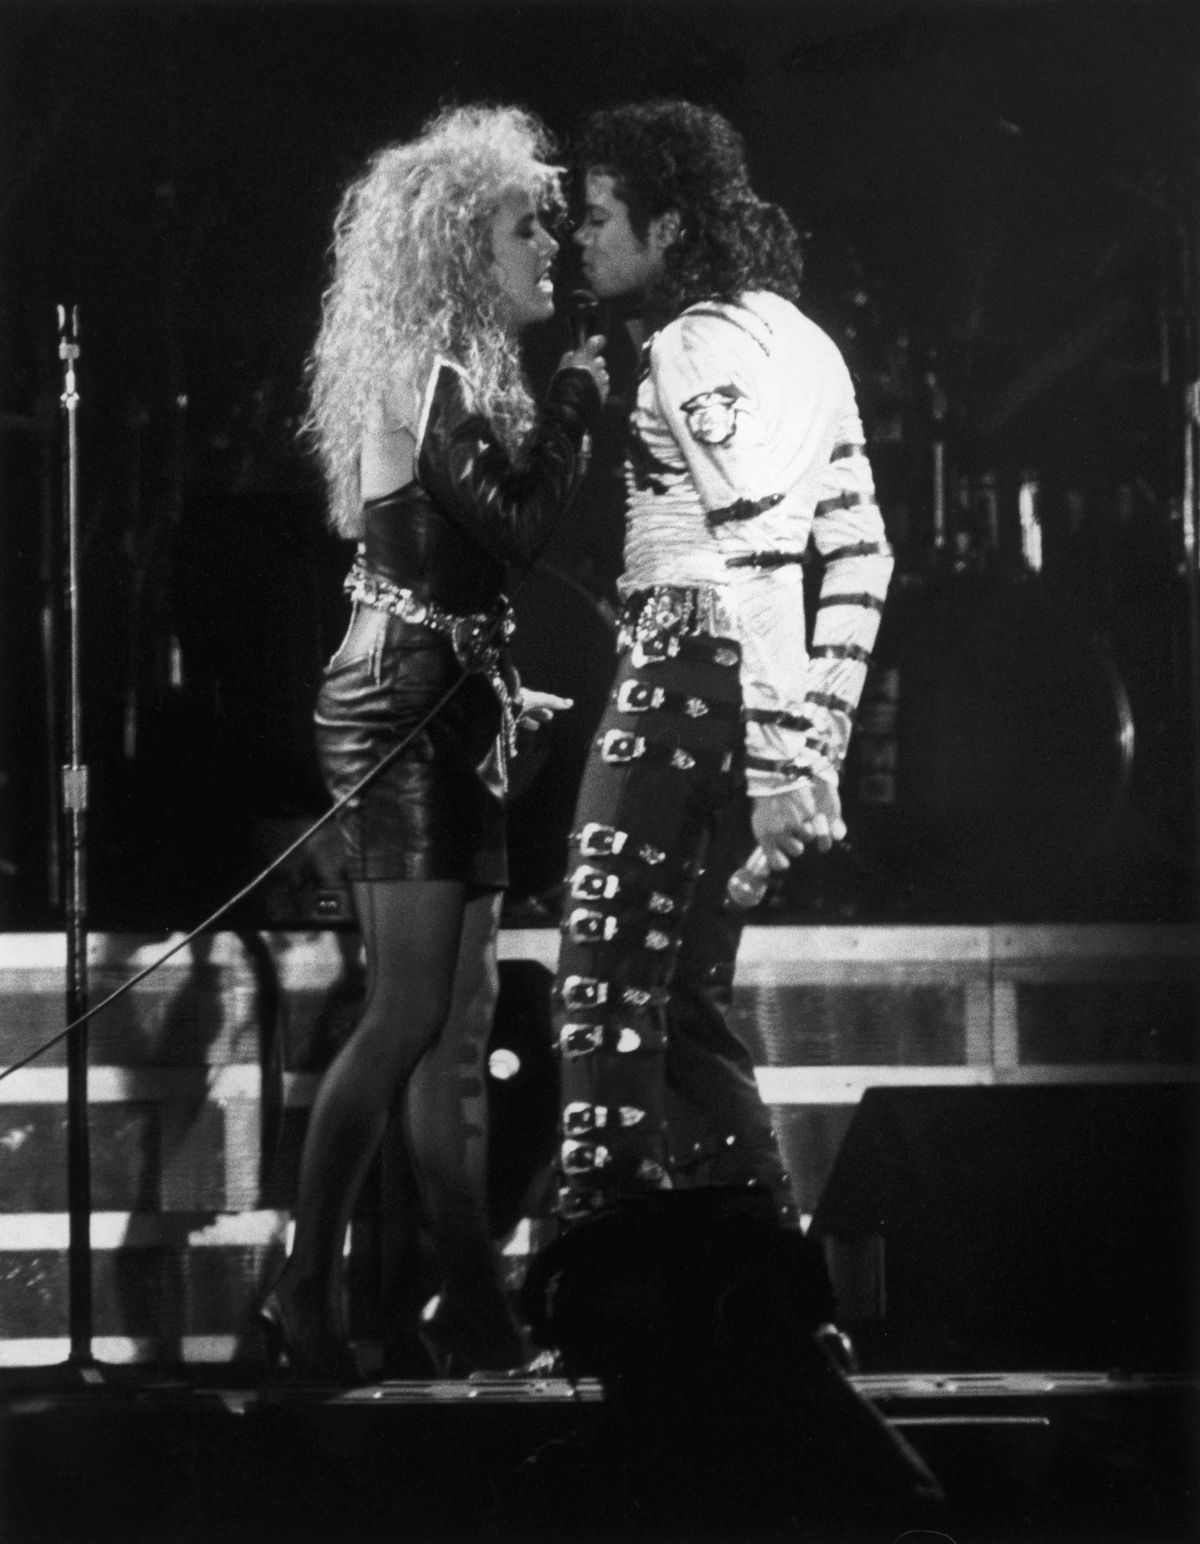 Pop star Michael Jackson performs a duet with backing singer Sheryl Crow during a concert in Rome, May 1988. | Getty Images